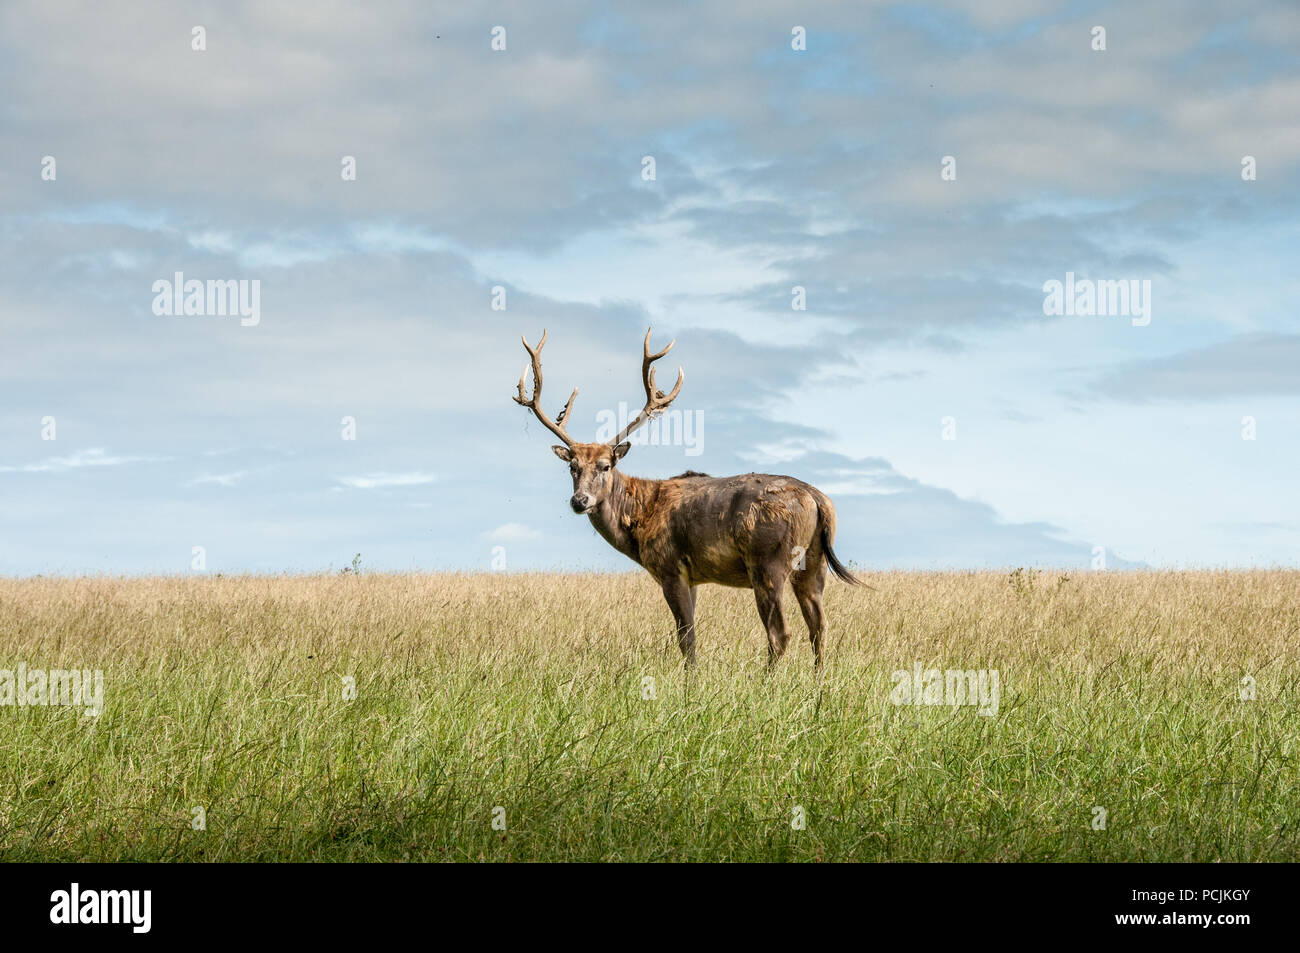 Pere David's stag deer in open grassland Stock Photo